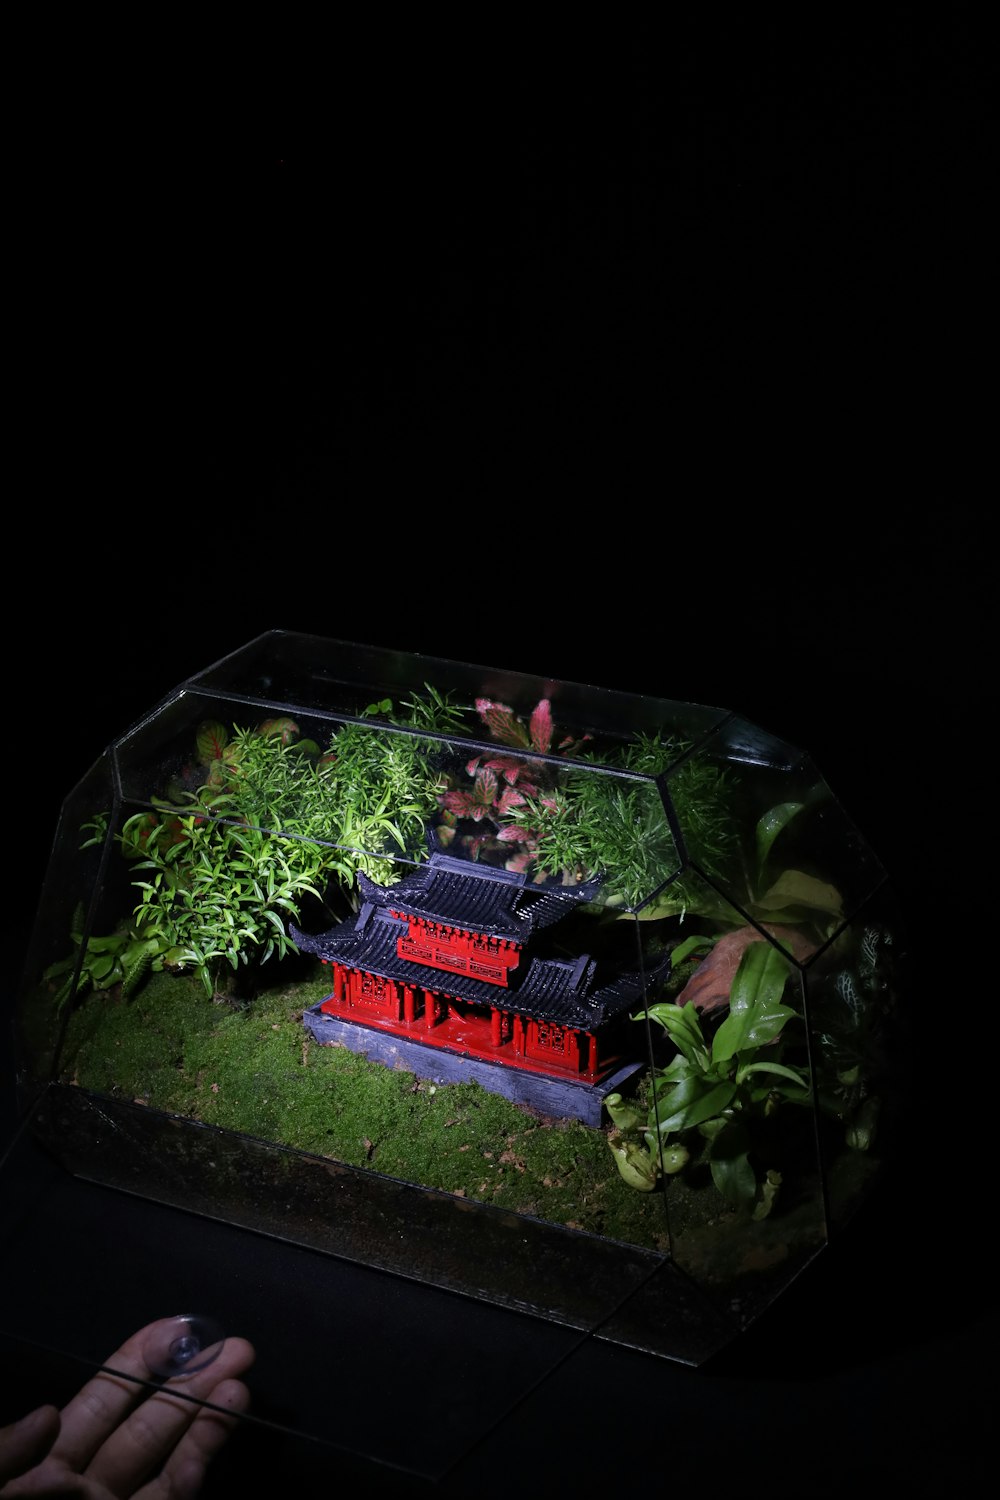 a person holding a remote control in front of a fish tank filled with plants